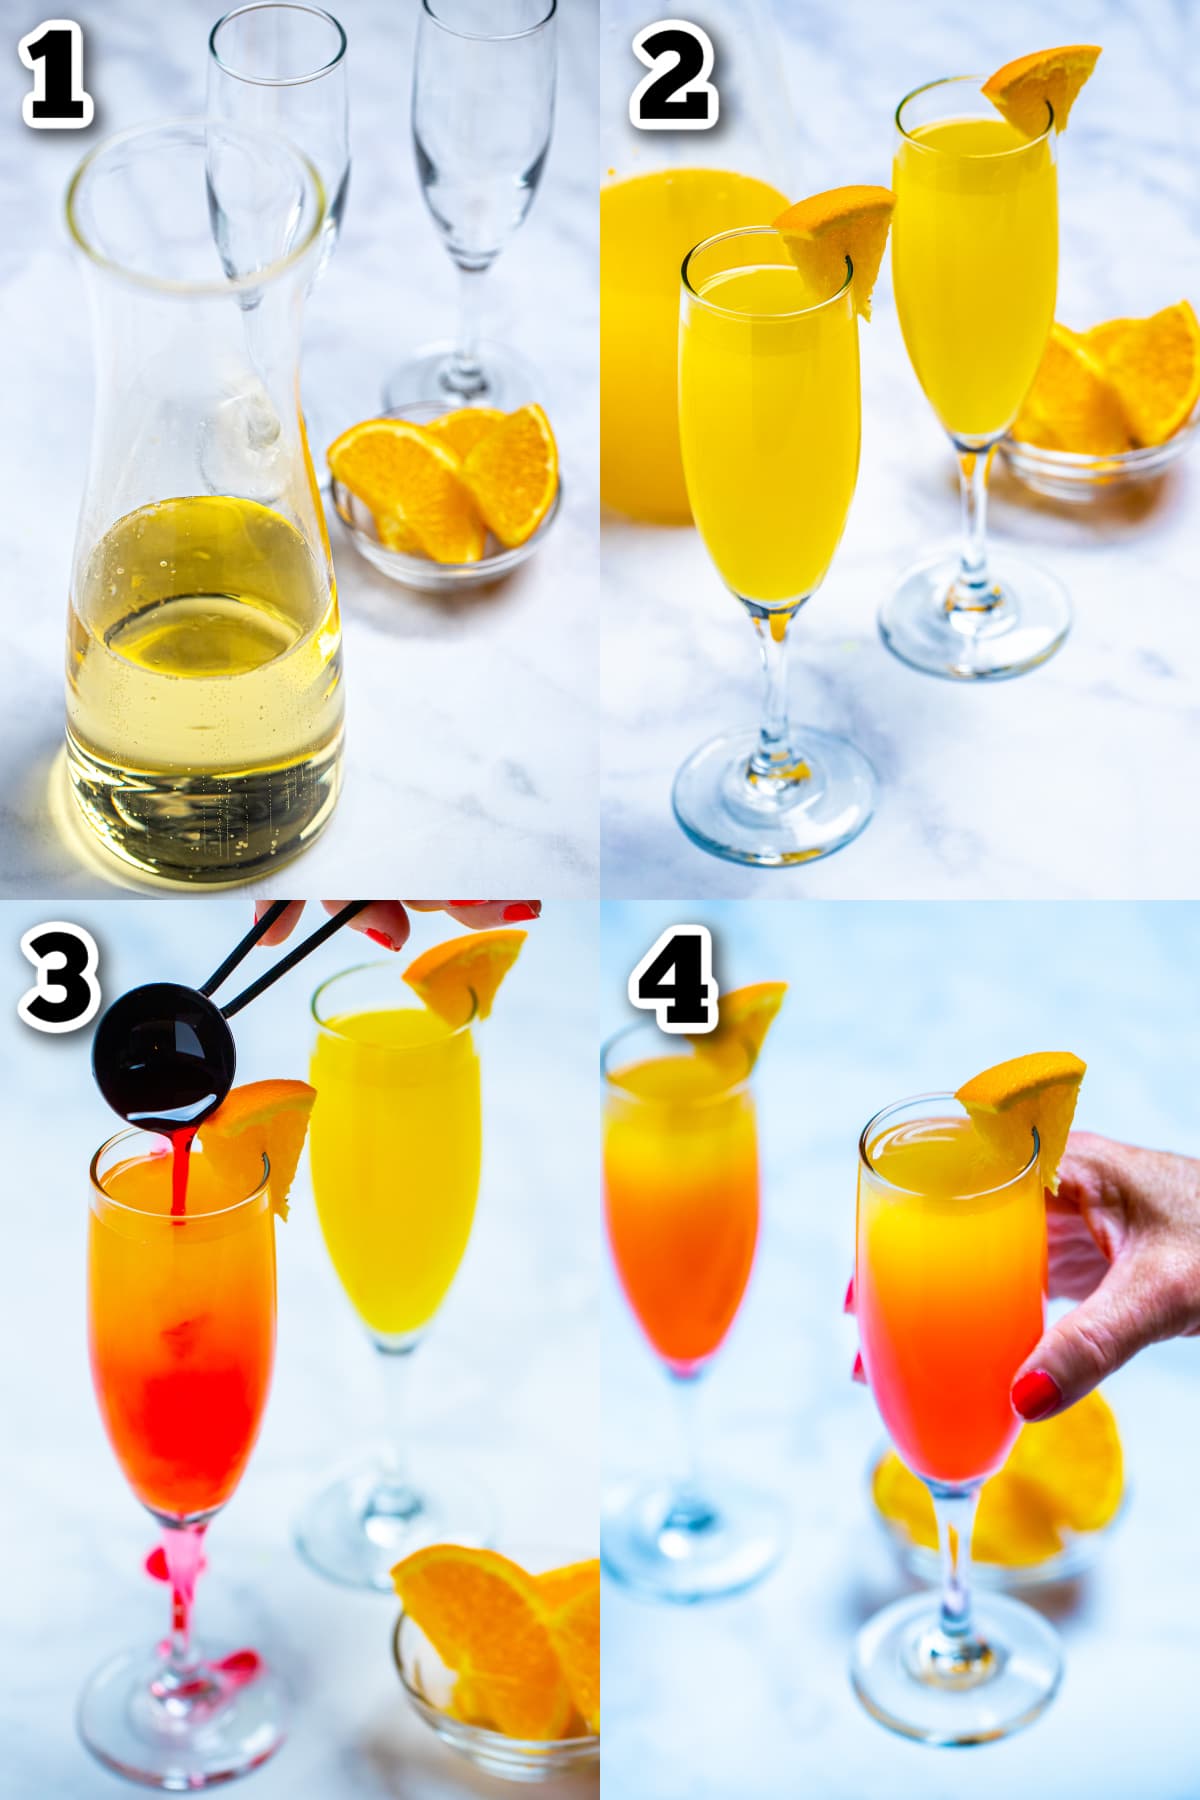 Step by step photos for how to make prosecco mimosas.